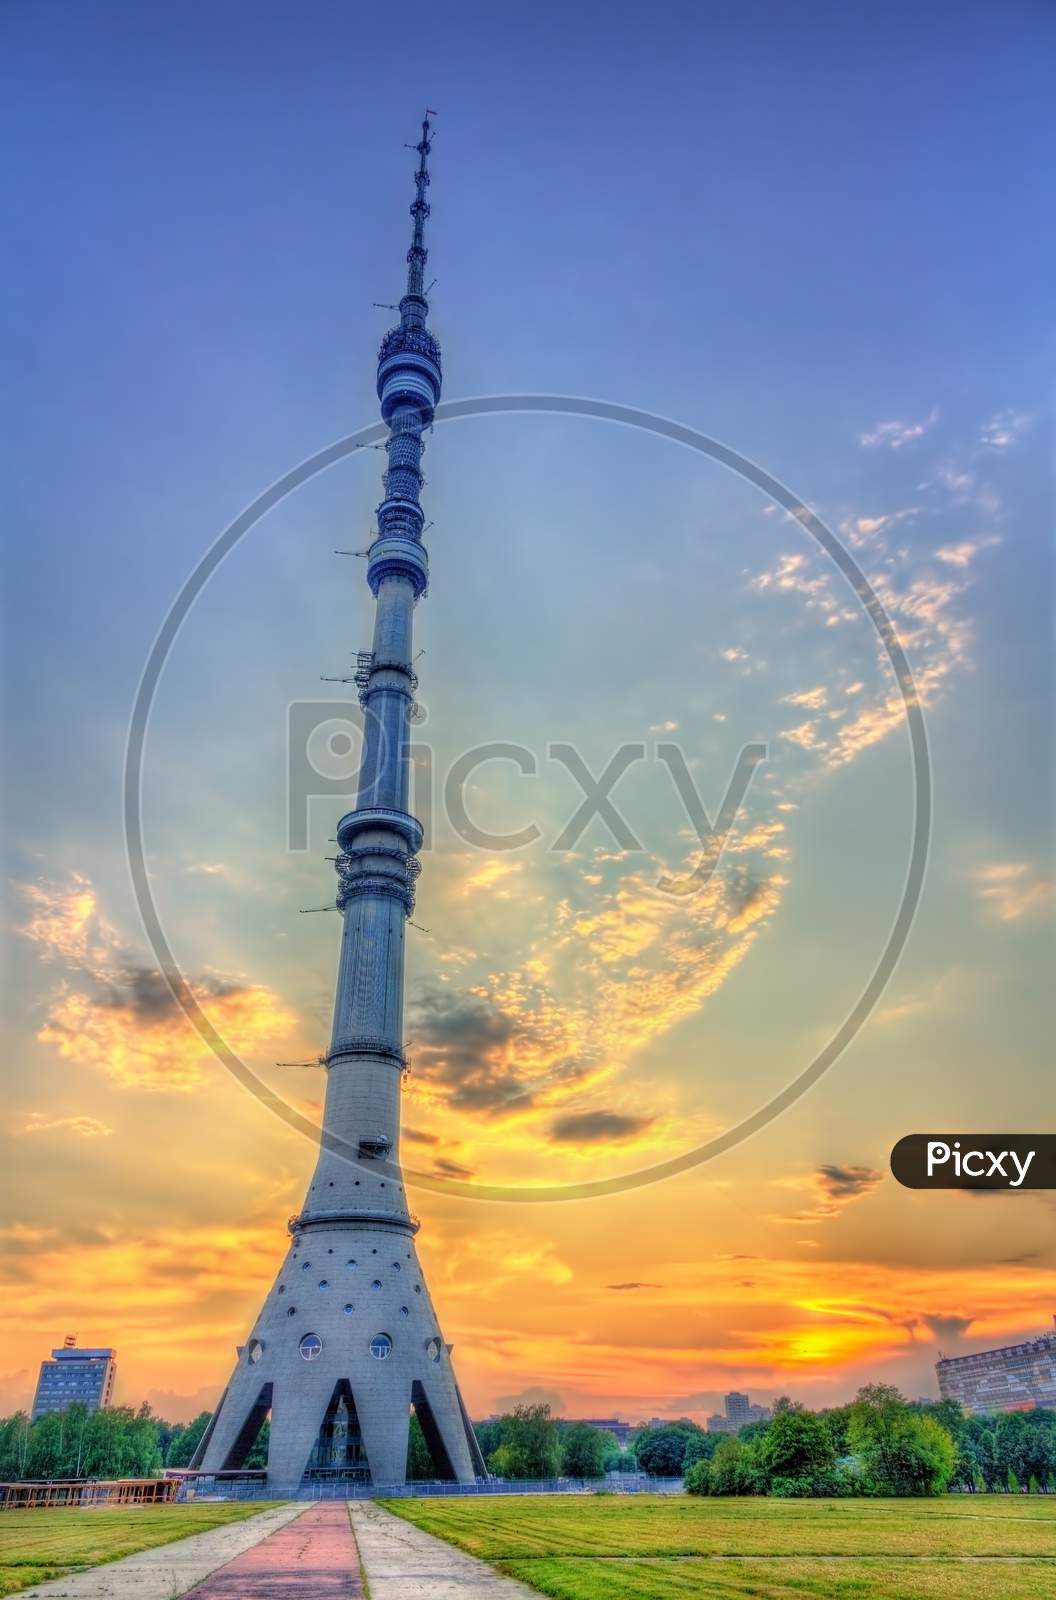 Ostankino Tower In Moscow, The Tallest Free-Standing Structure In Europe